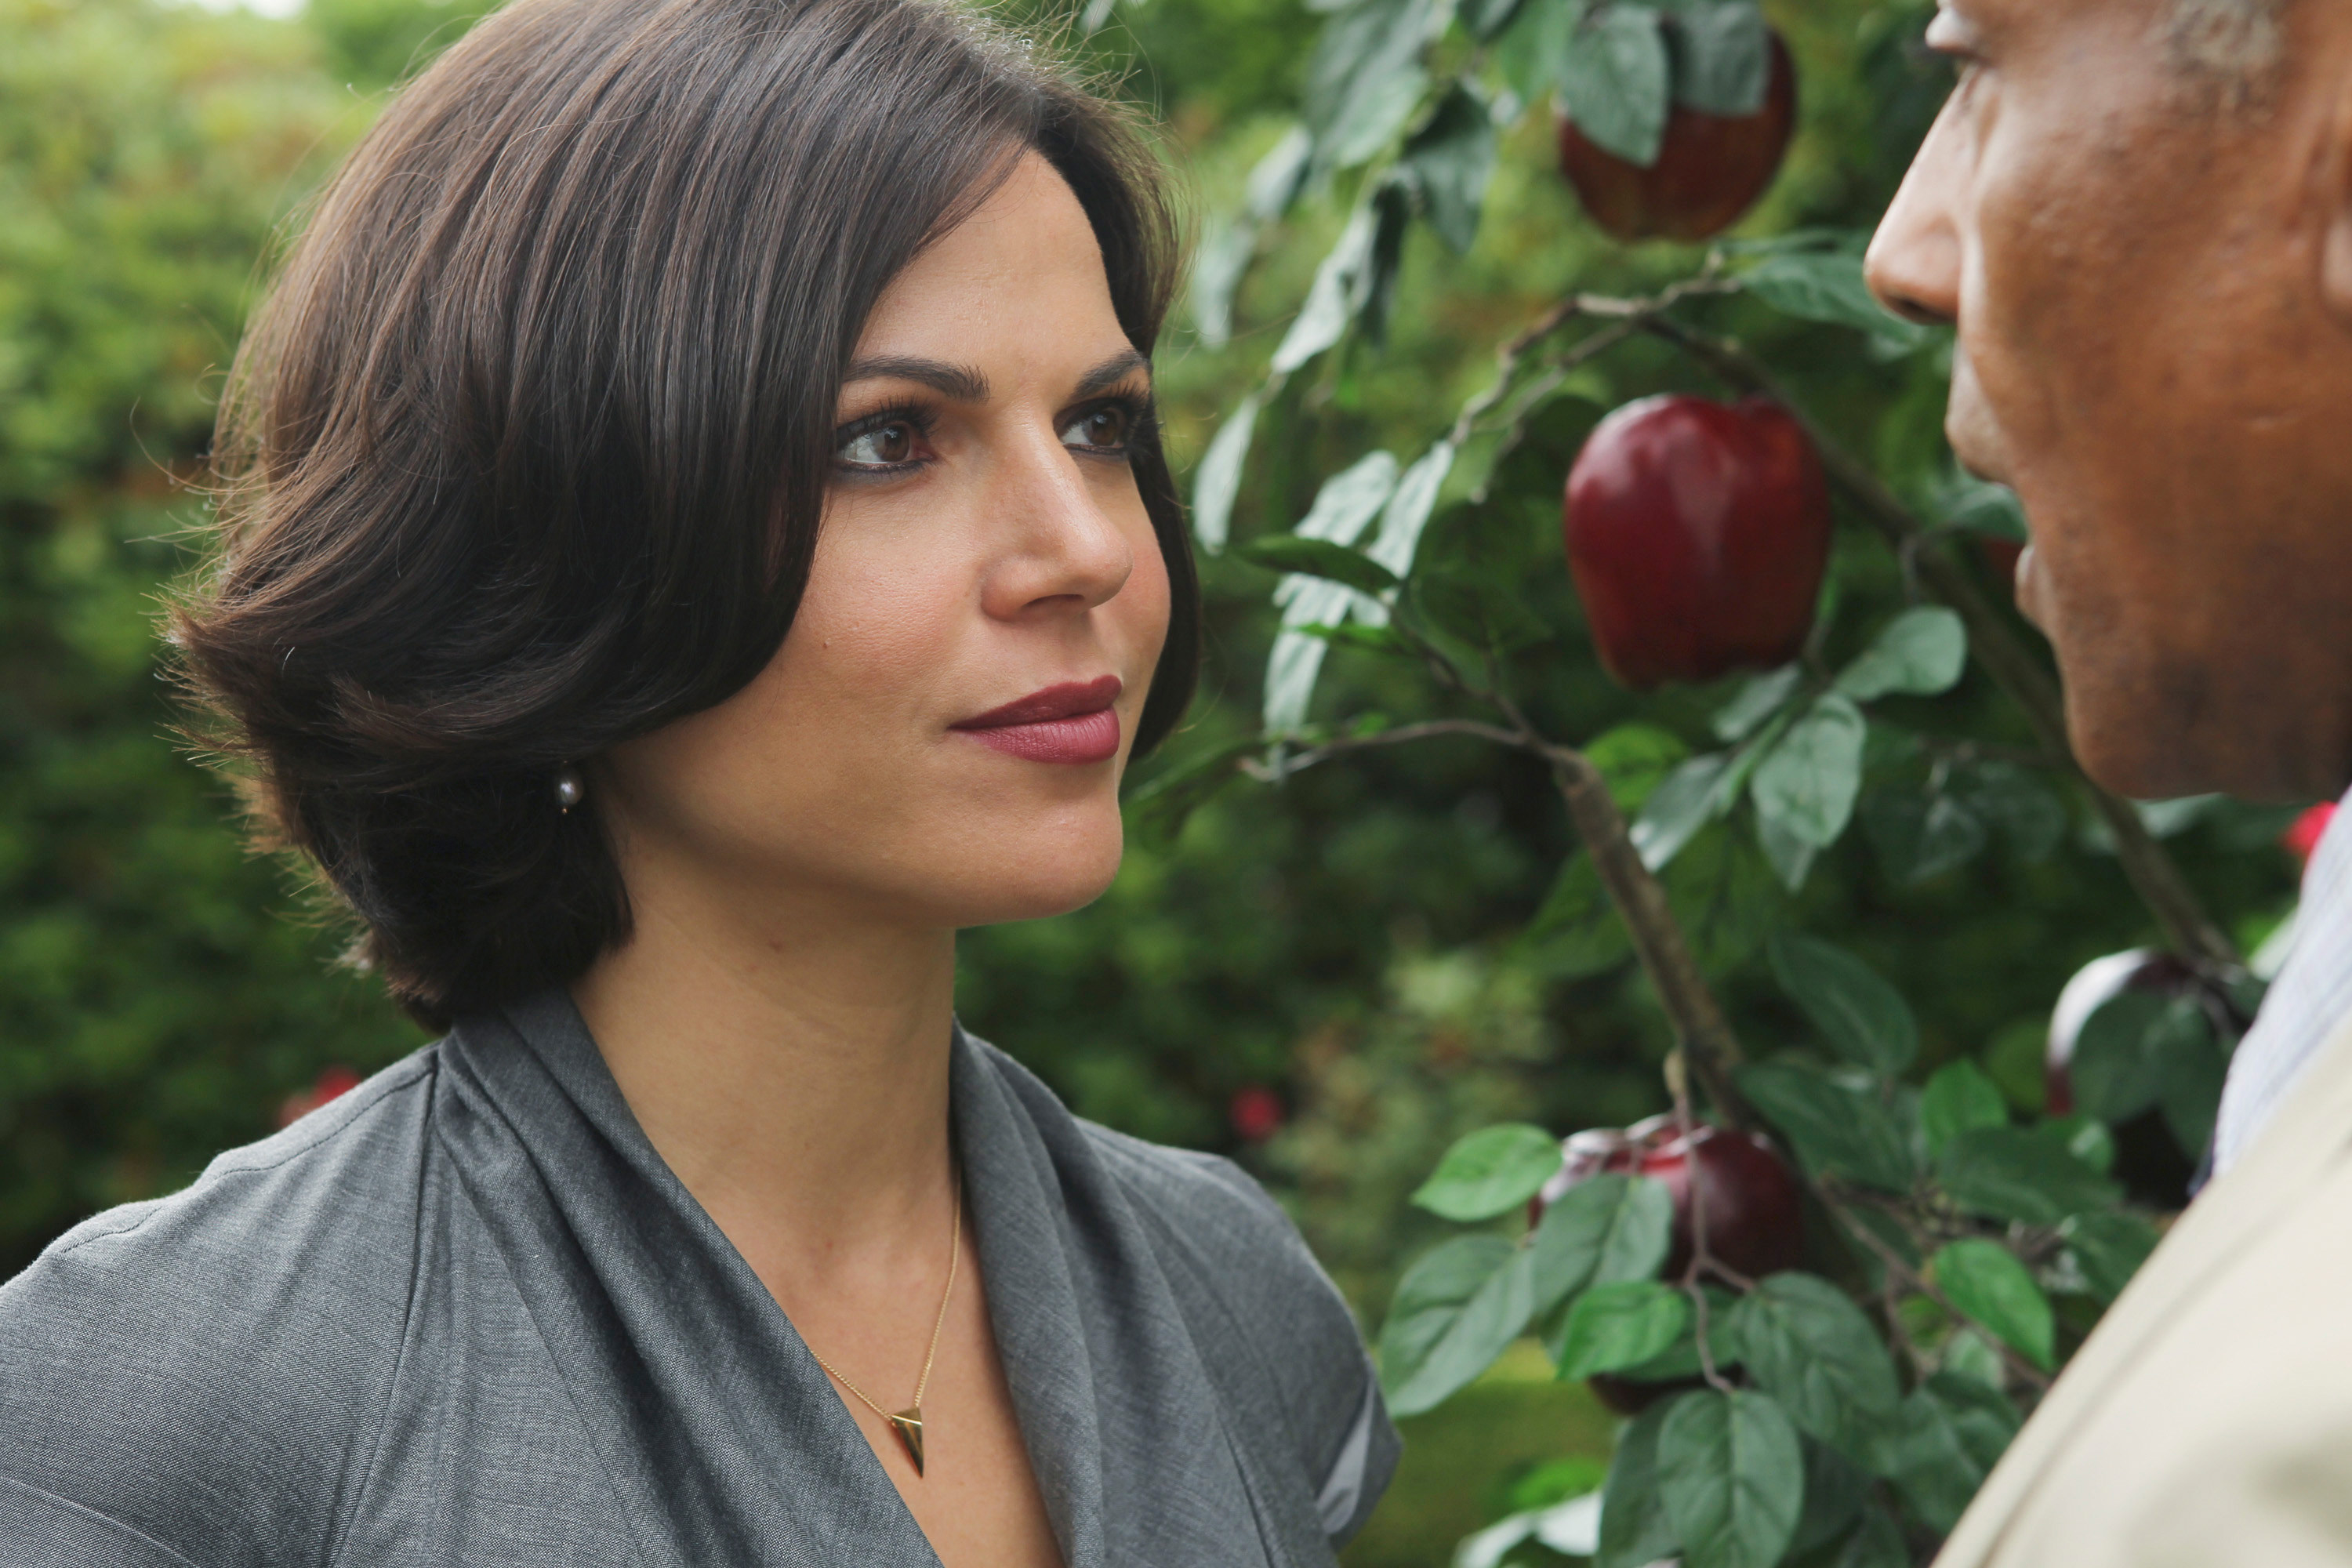 The Evil Queen grinning beside an apple tree